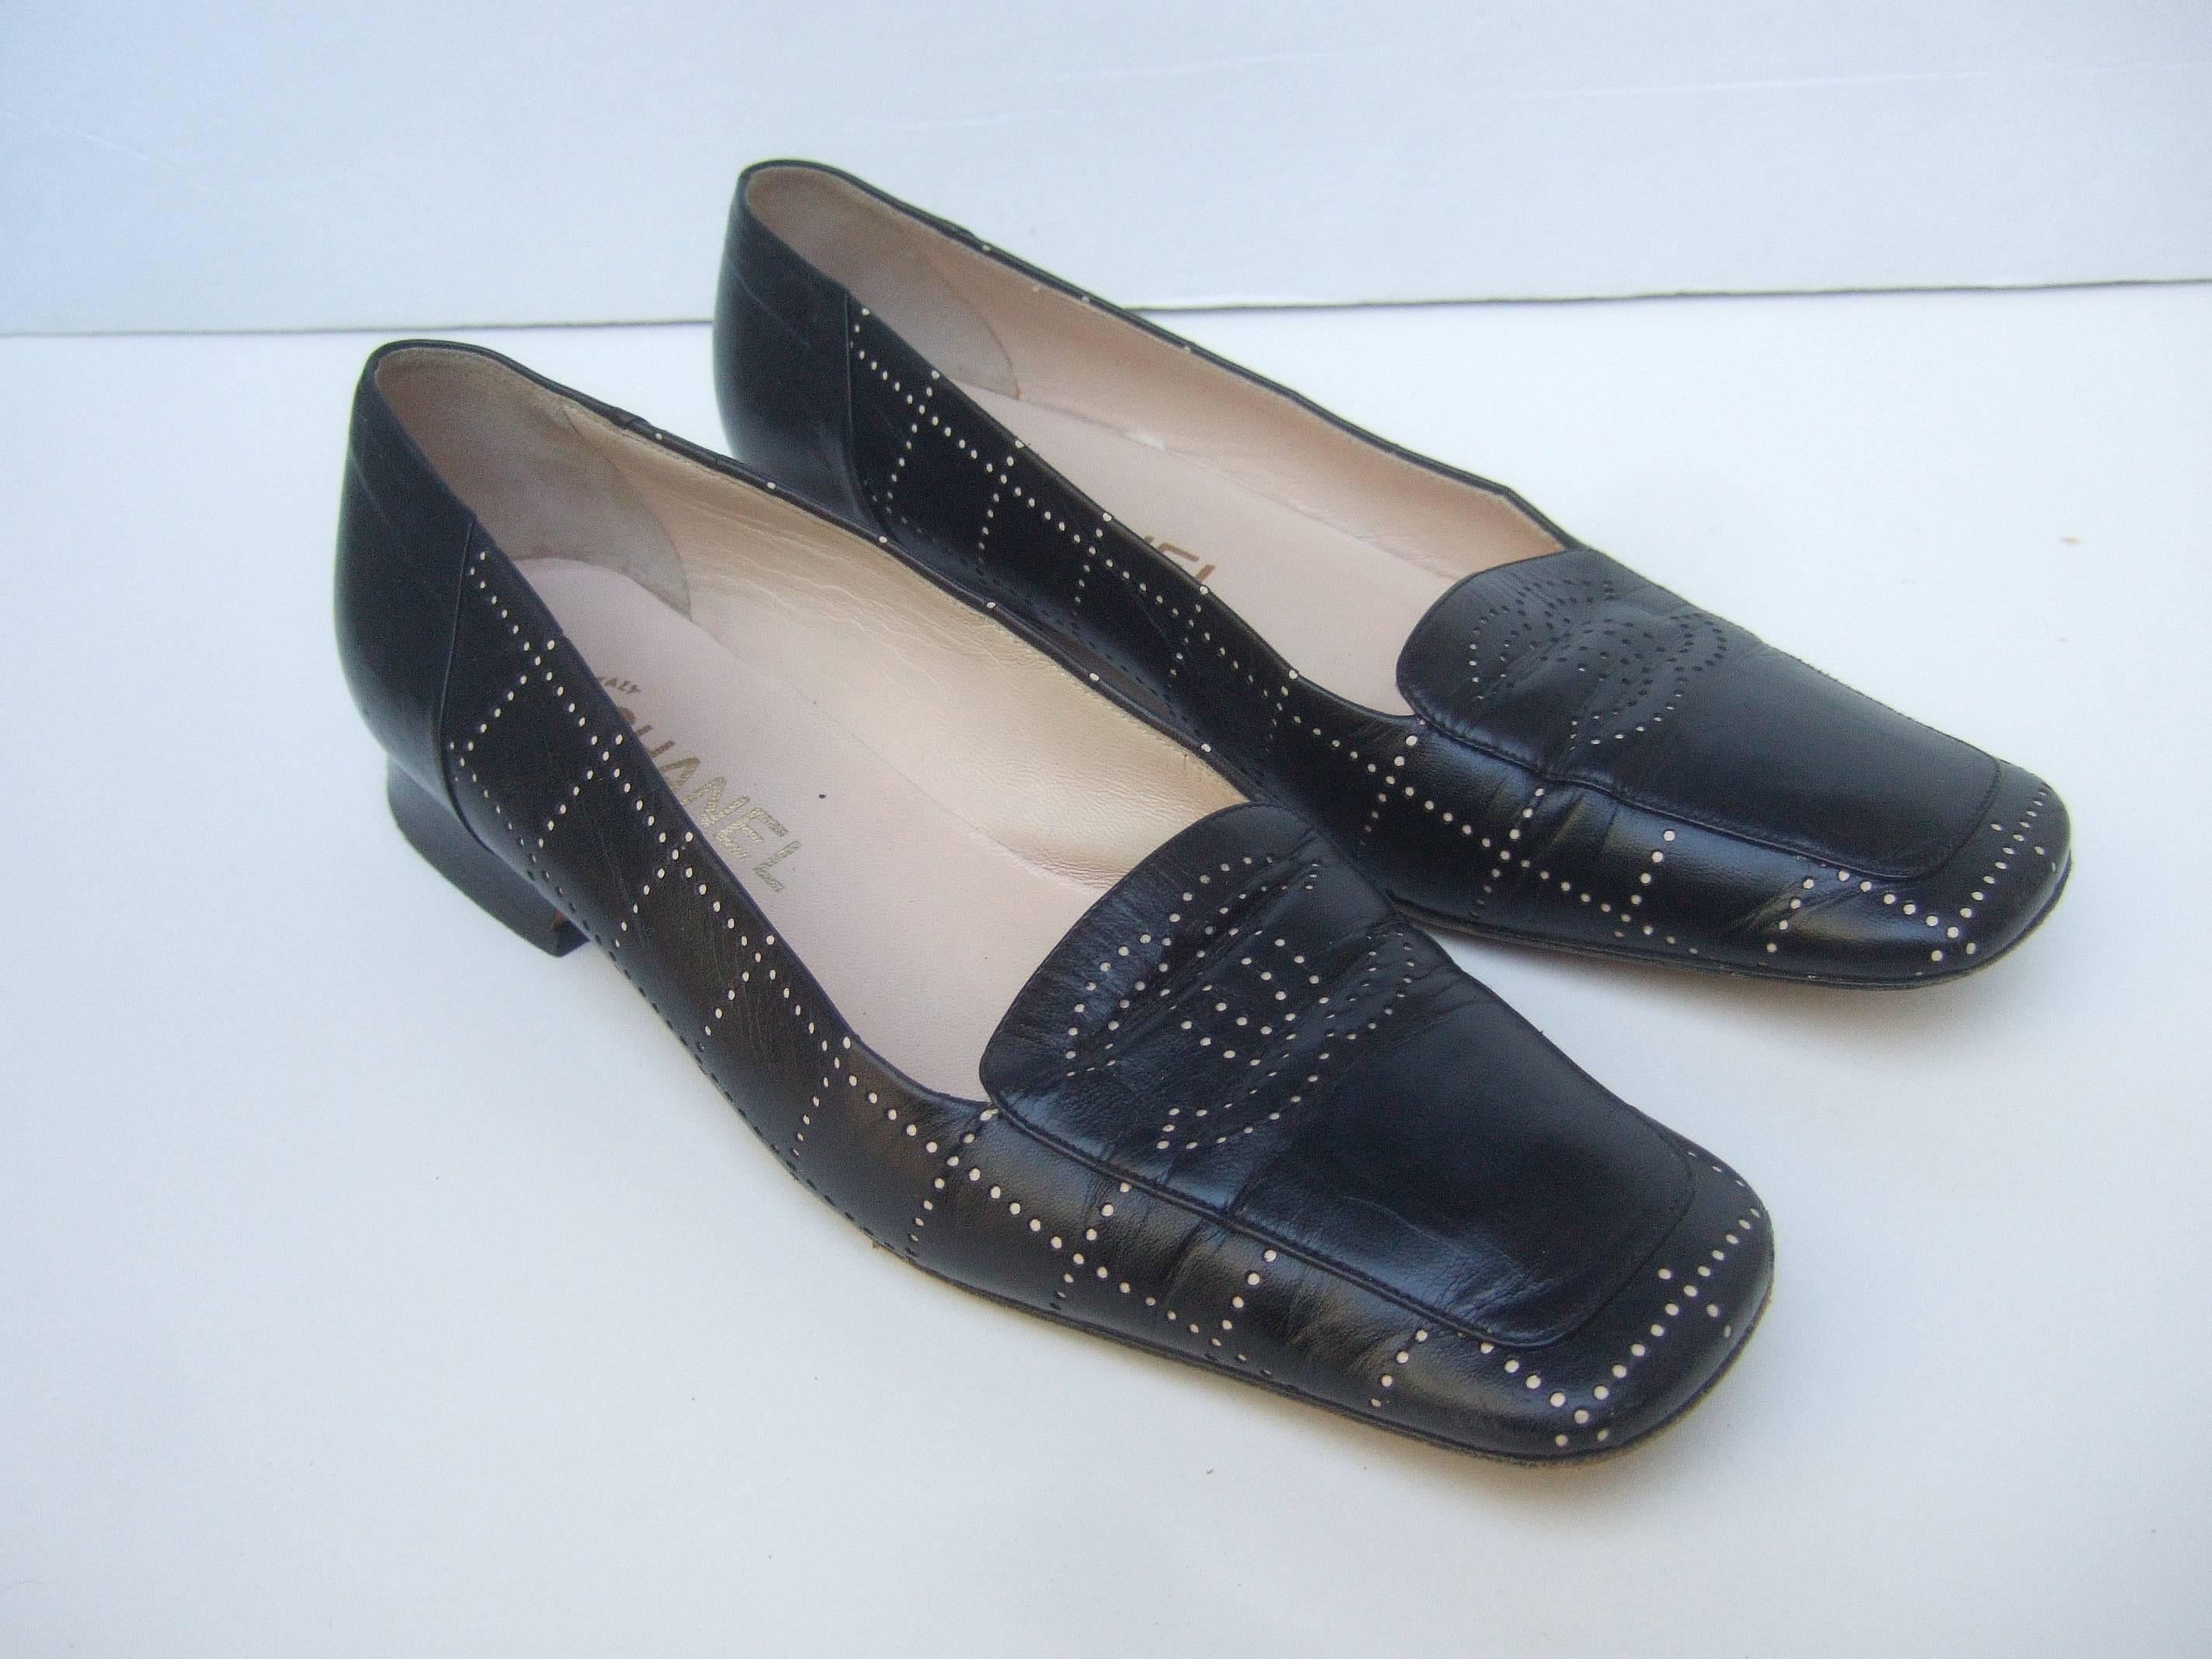 Chanel Stylish black leather perforated skimmer flats Size 37.5 
The classic black leather loafers are covered with black
leather with Chanel's large interlocked C.C. initials 
on the front

The shoes have subtle perforated detail for the